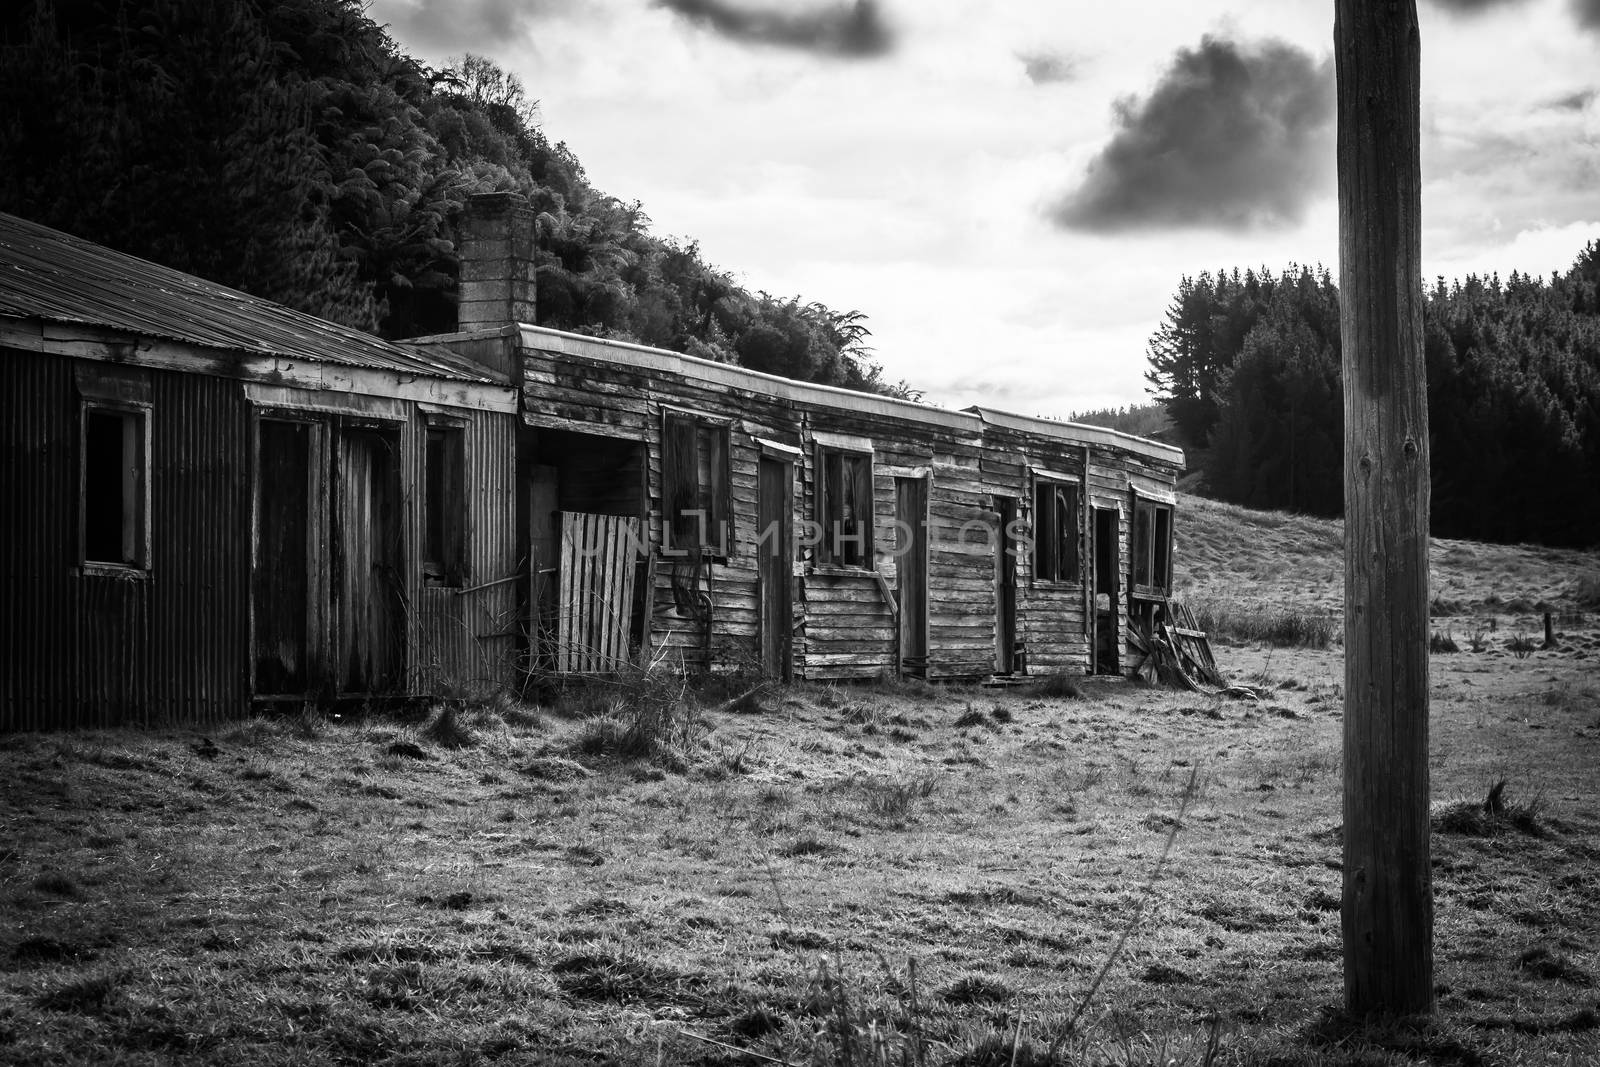 Old farm buildings left to deteriorate make a rustic old-world image.